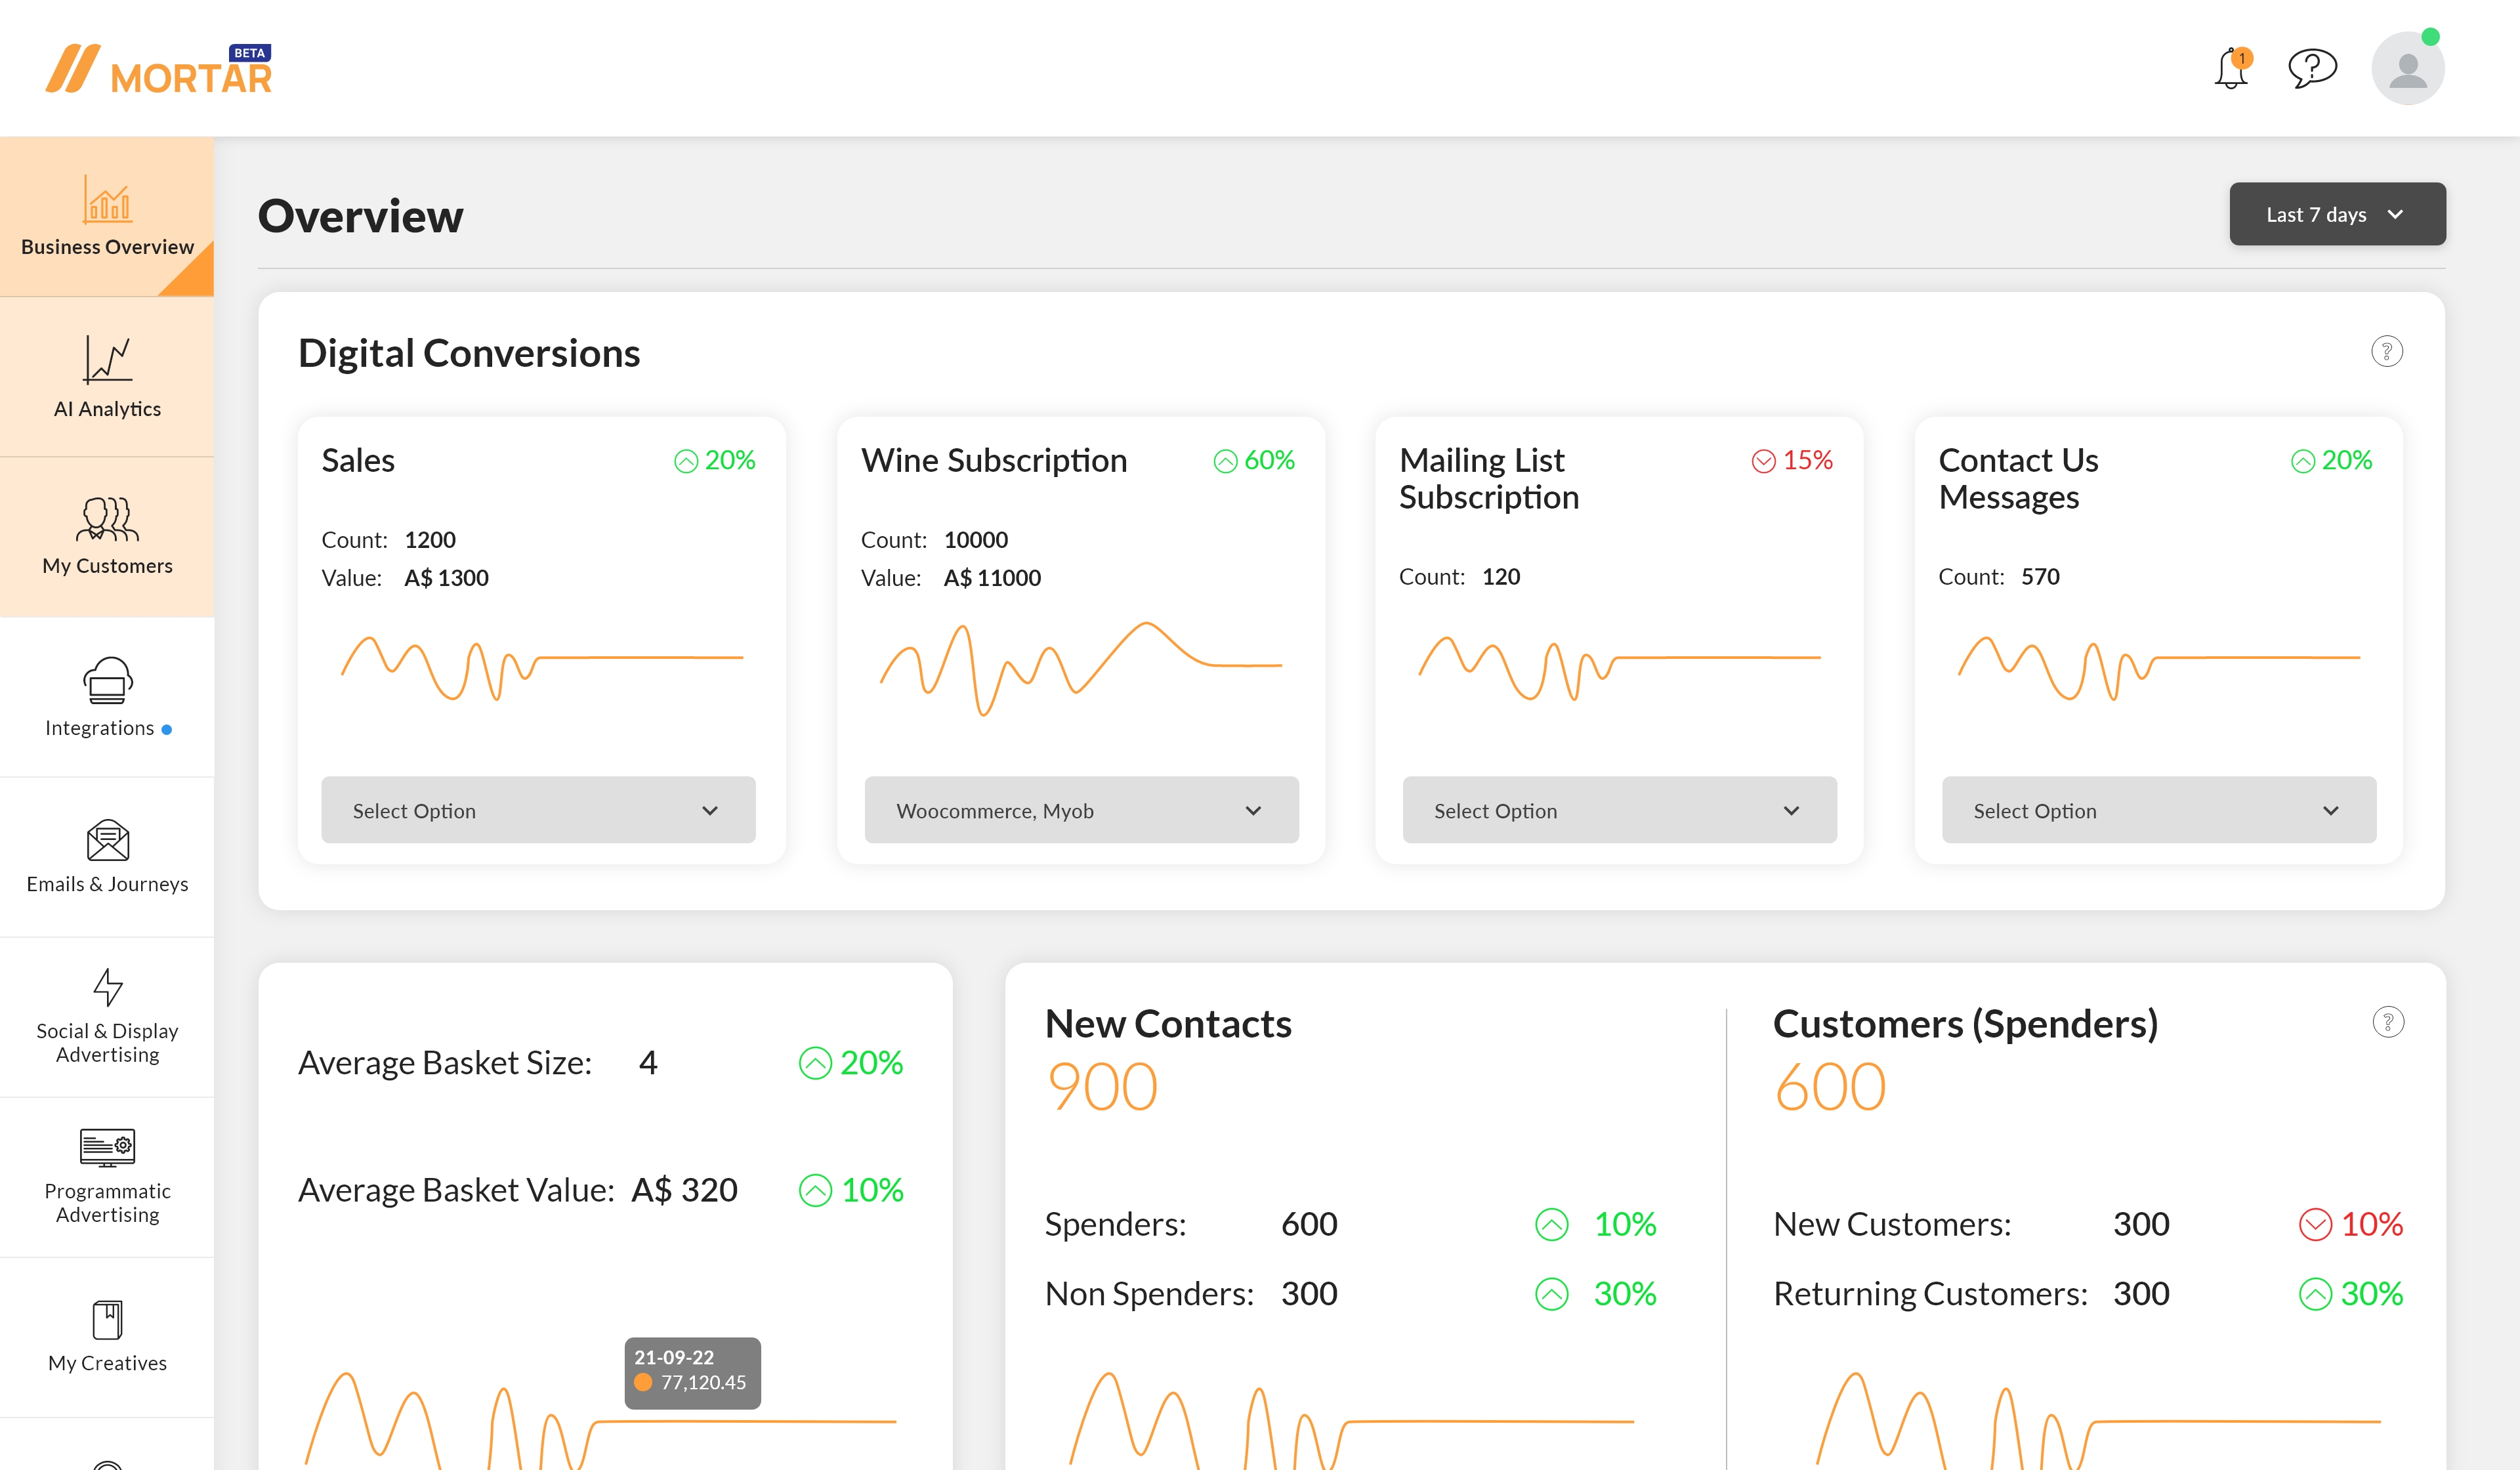 Comprehensive overview of all of your data - we clean, analyse, and unify all of your fragmented data onto one easy-to-use dashboard in real-time